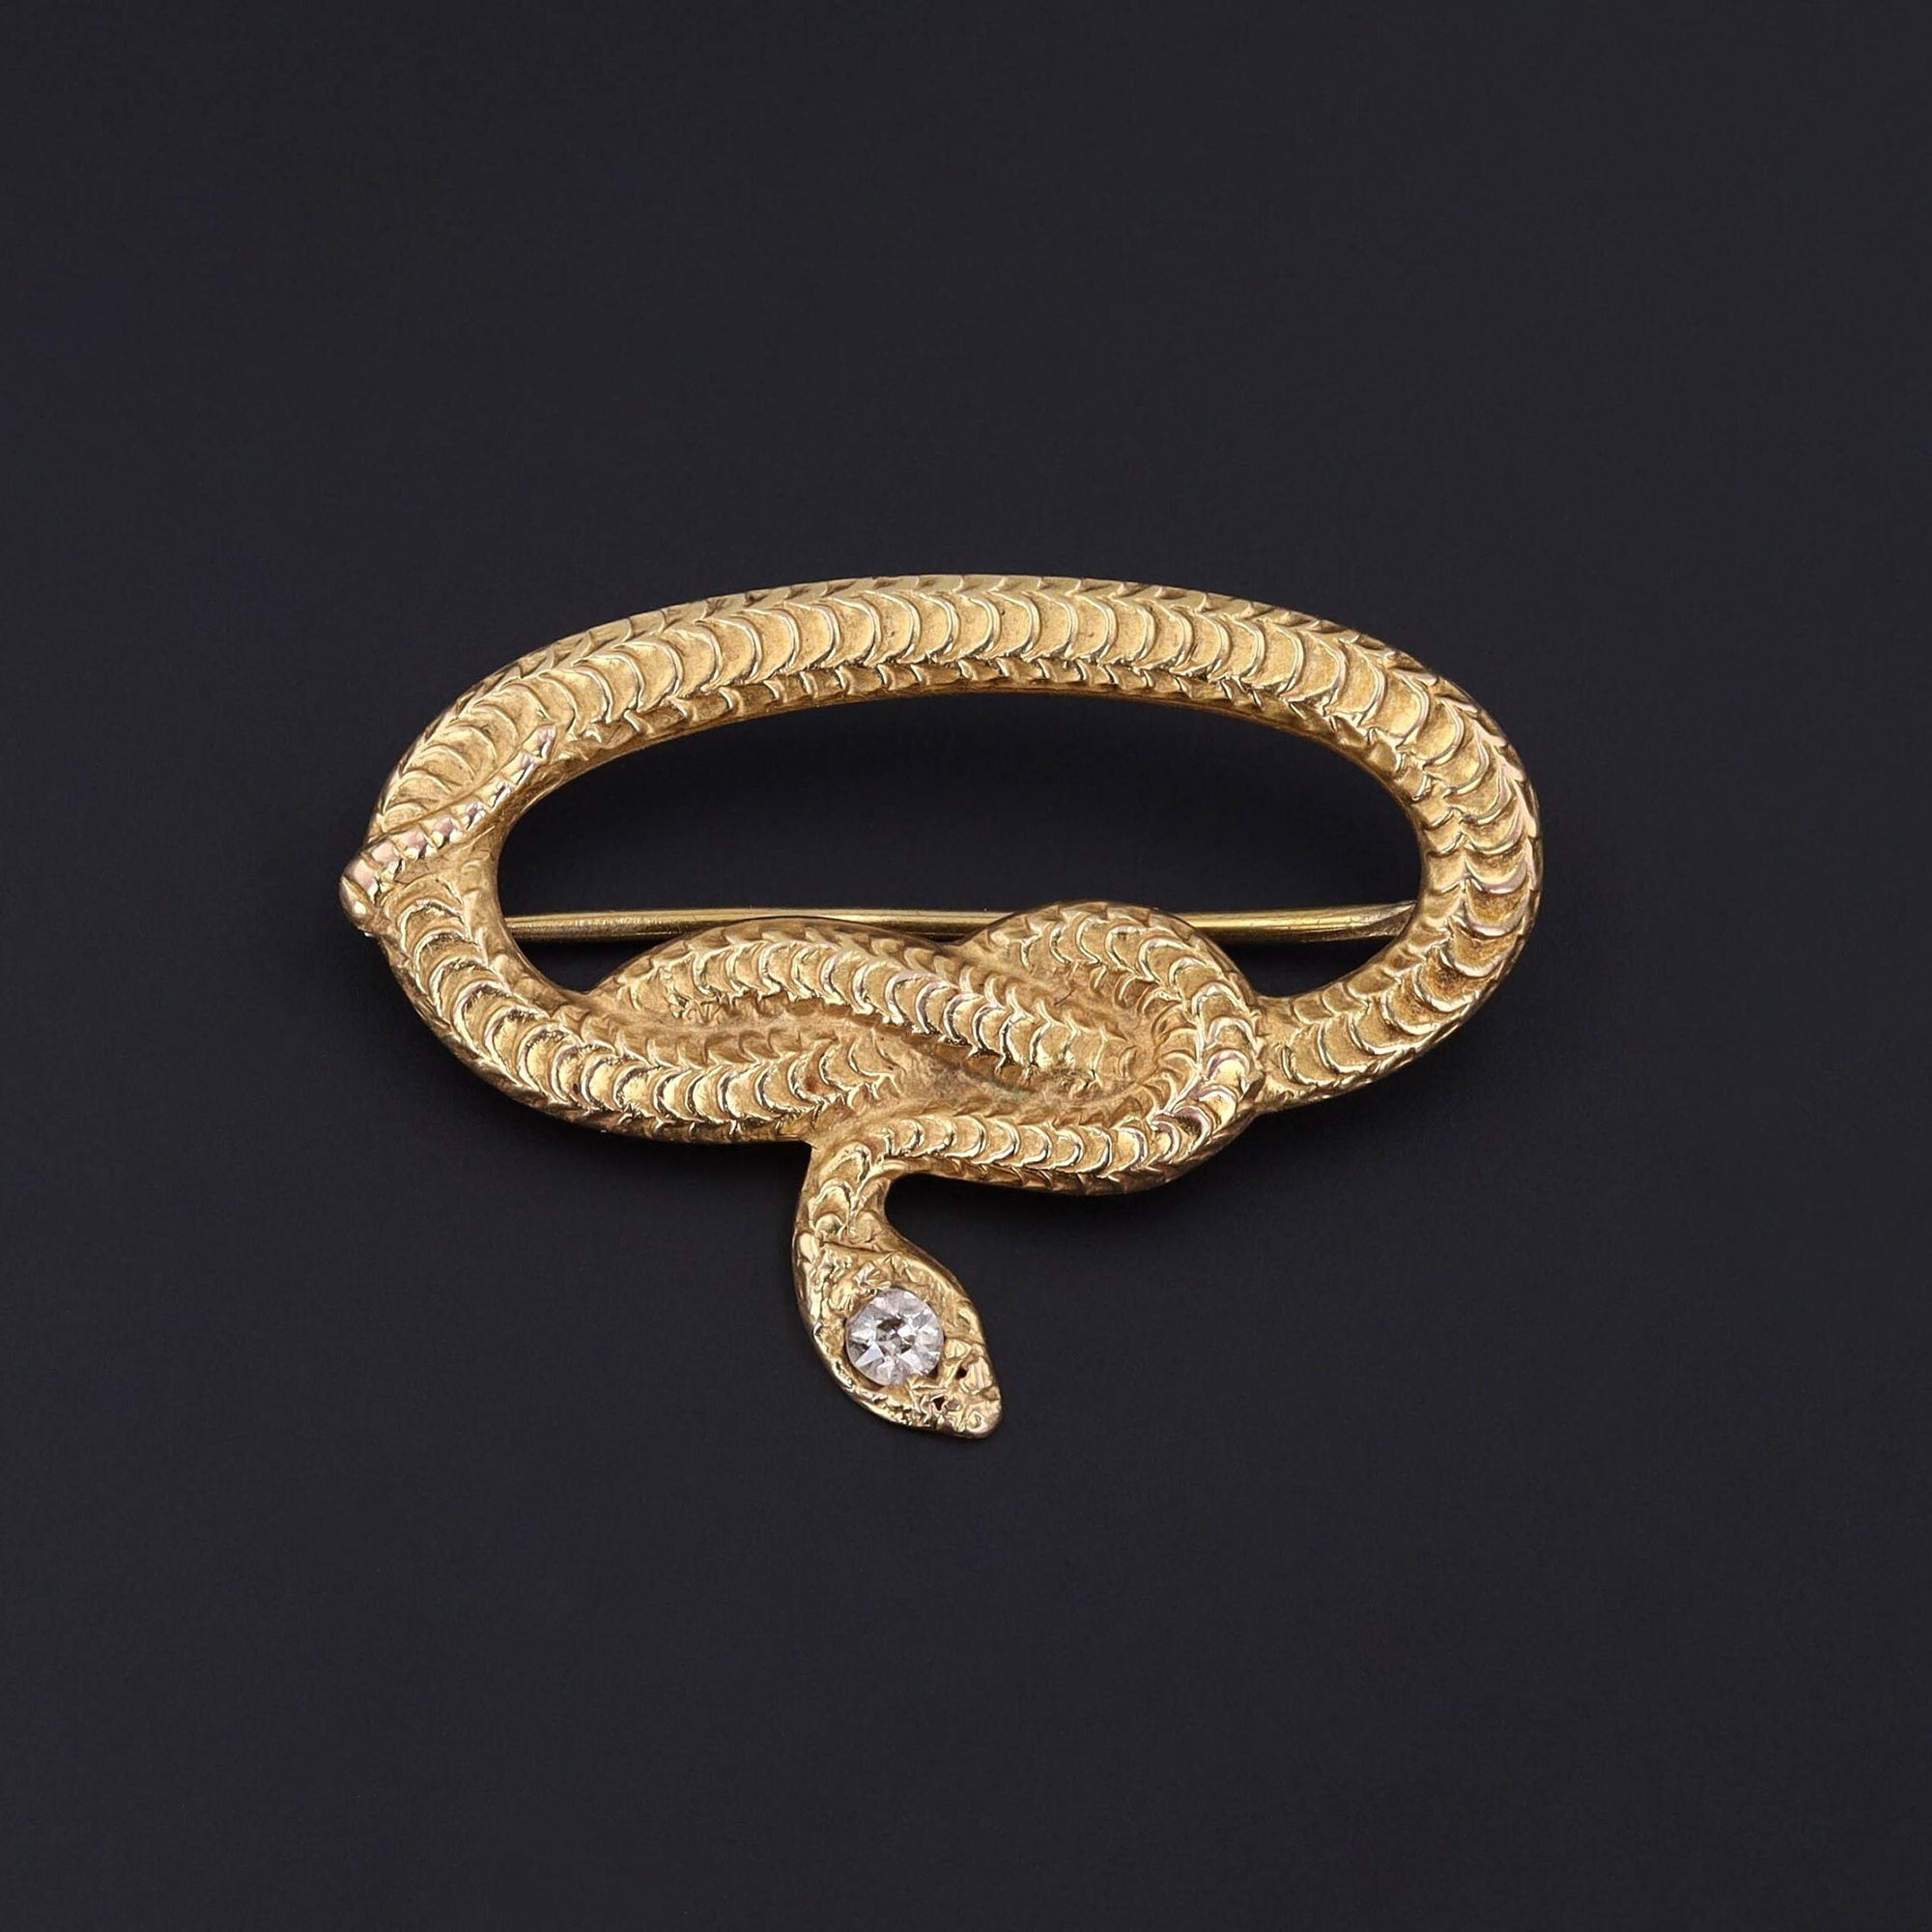 Antique Snake Brooch of 14k Gold with a Diamond Accent